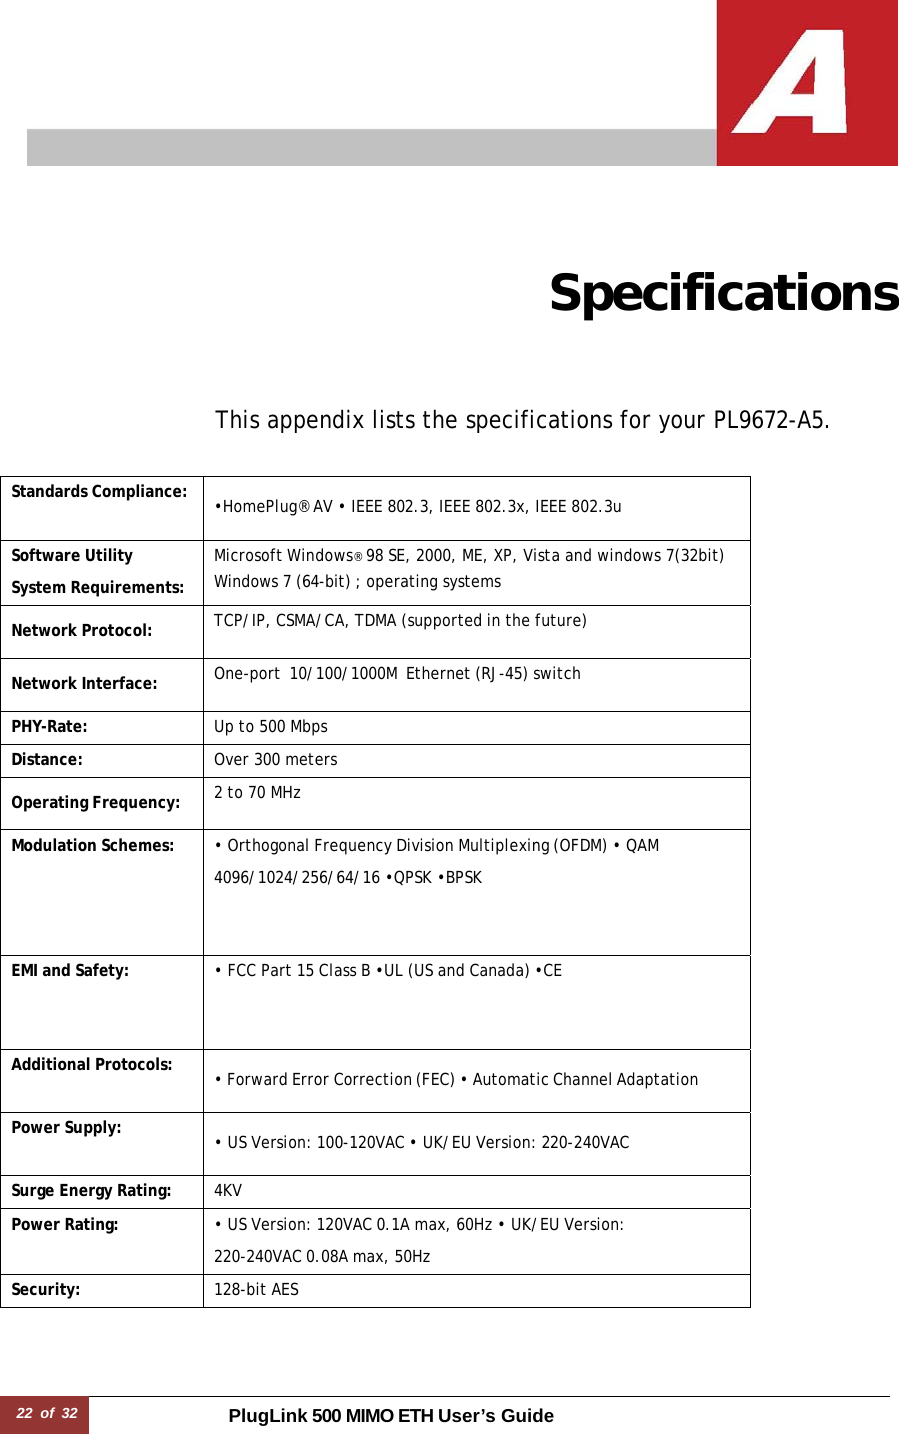 22 of 32 PlugLink 500 MIMO ETH User’s Guide                Specifications     This appendix lists the specifications for your PL9672-A5.   Standards Compliance: •HomePlug® AV • IEEE 802.3, IEEE 802.3x, IEEE 802.3u Software Utility  System Requirements: Microsoft Windows® 98 SE, 2000, ME, XP, Vista and windows 7(32bit)  Windows 7 (64-bit) ; operating systems  Network Protocol: TCP/IP, CSMA/CA, TDMA (supported in the future) Network Interface: One-port  10/100/1000M  Ethernet (RJ-45) switchPHY-Rate:  Up to 500 Mbps Distance: Over 300 meters Operating Frequency: 2 to 70 MHz Modulation Schemes: • Orthogonal Frequency Division Multiplexing (OFDM) • QAM  4096/1024/256/64/16 •QPSK •BPSK EMI and Safety: • FCC Part 15 Class B •UL (US and Canada) •CEAdditional Protocols: • Forward Error Correction (FEC) • Automatic Channel Adaptation Power Supply: • US Version: 100-120VAC • UK/EU Version: 220-240VAC Surge Energy Rating: 4KV Power Rating: • US Version: 120VAC 0.1A max, 60Hz • UK/EU Version:  220-240VAC 0.08A max, 50Hz Security: 128-bit AES 